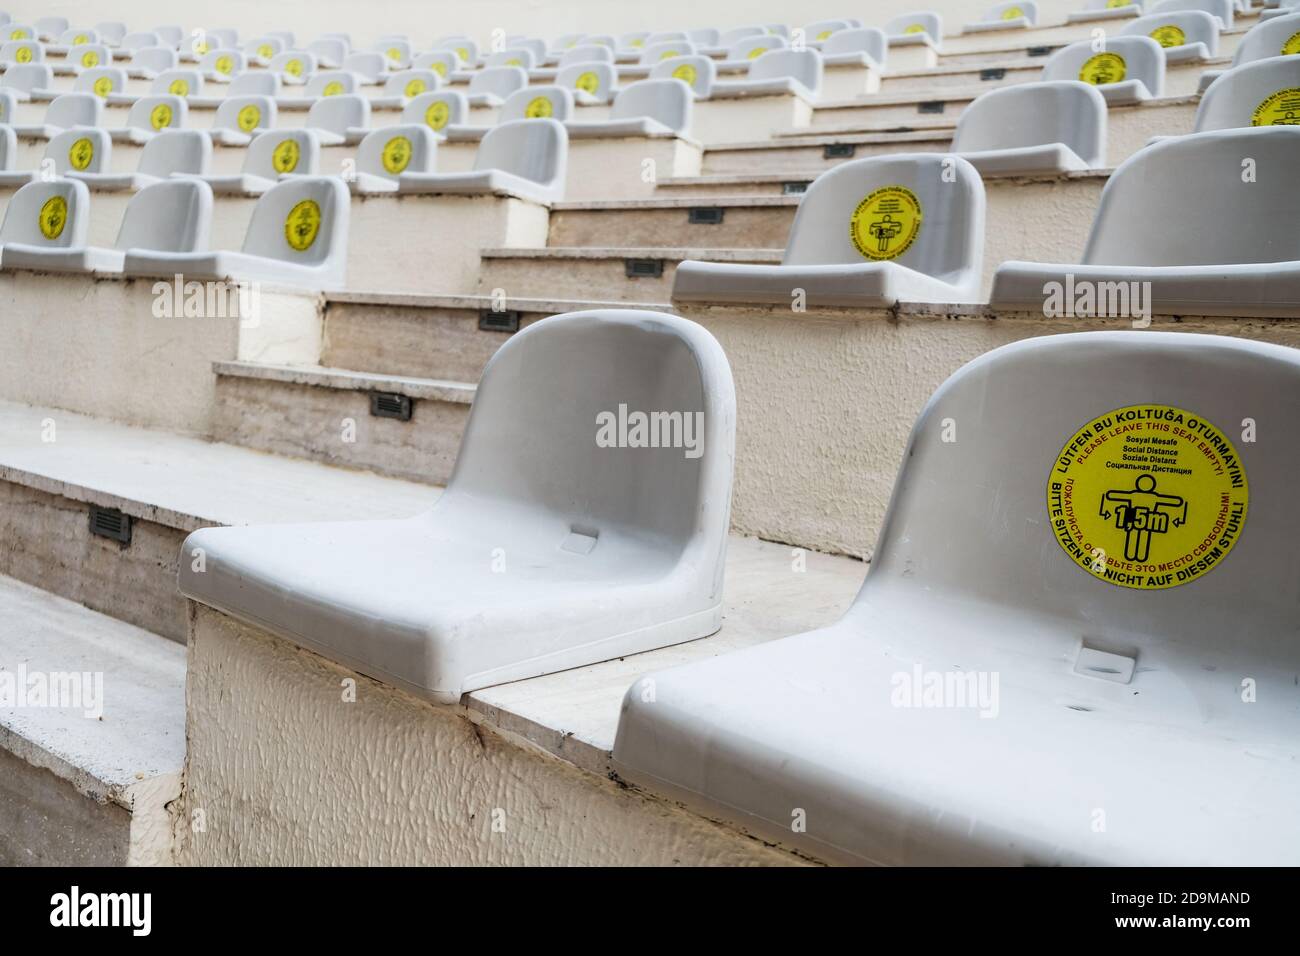 Avoiding crowds during show in amphitheater. Warning sign: leave some seats free for social distancing during coronavirus outbreak. New normal life Stock Photo